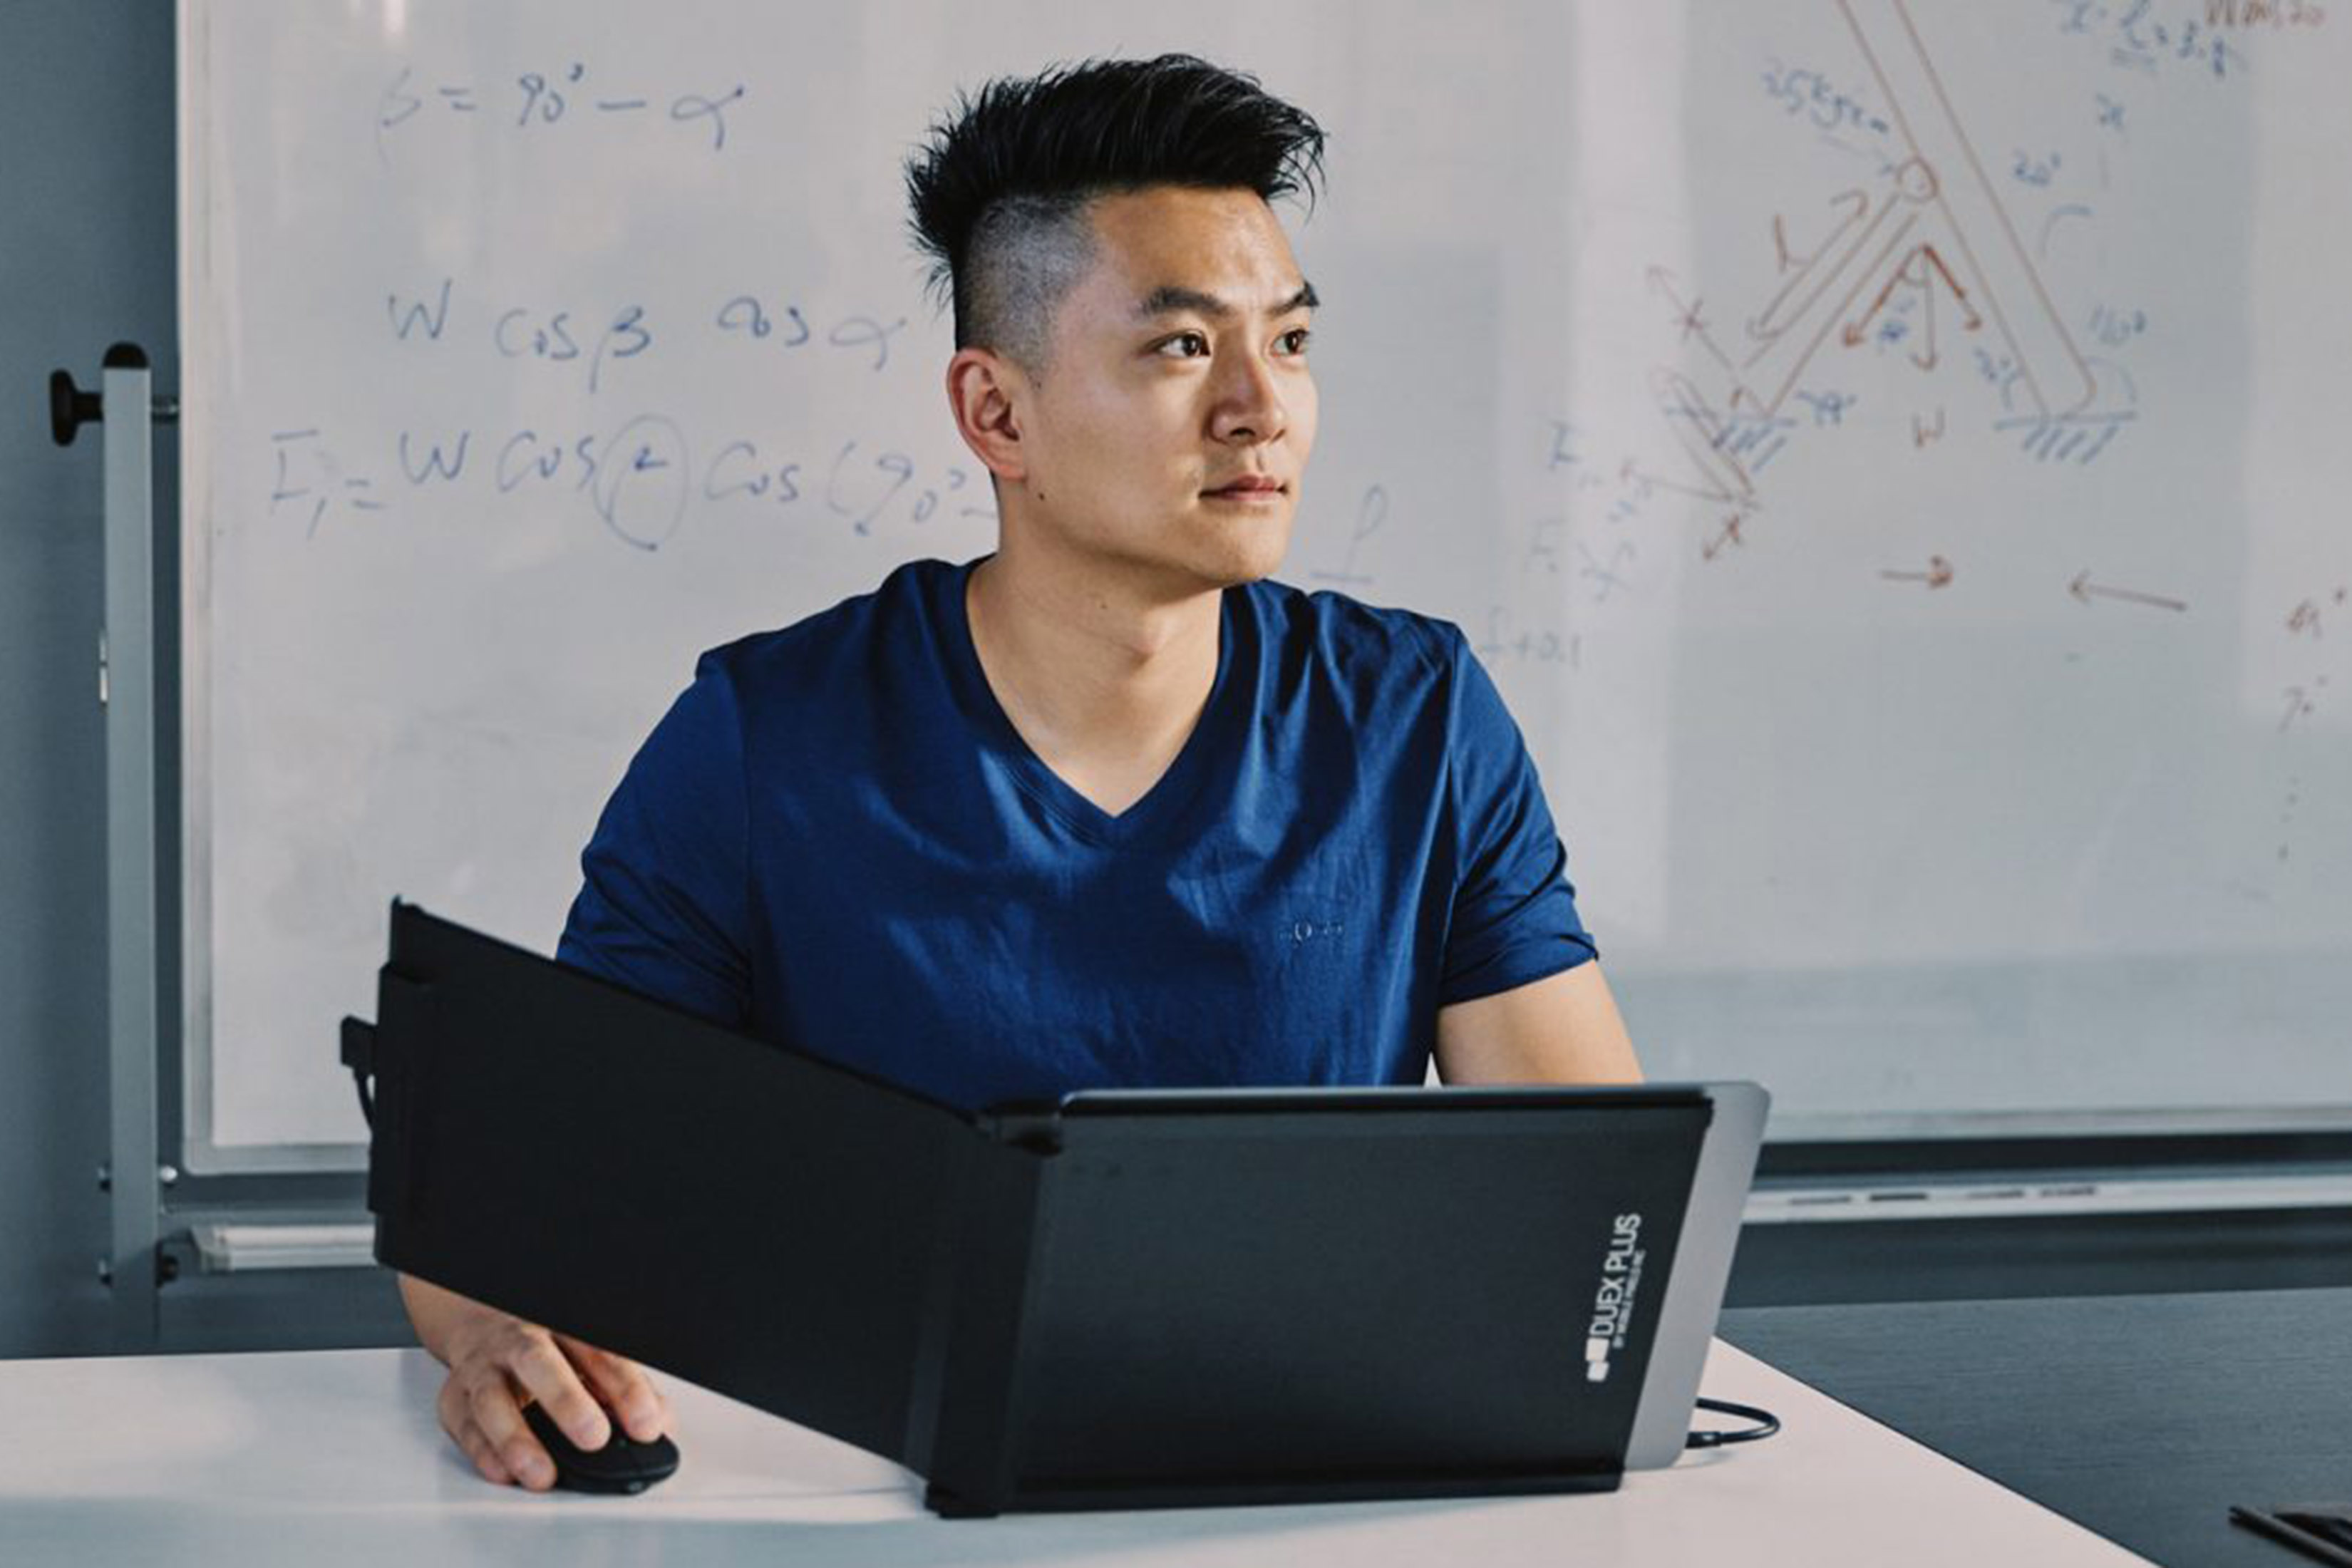 Jack Yao is shown at a table with a small computer screen in front of him. It has an extended display. A whiteboard is behind him.